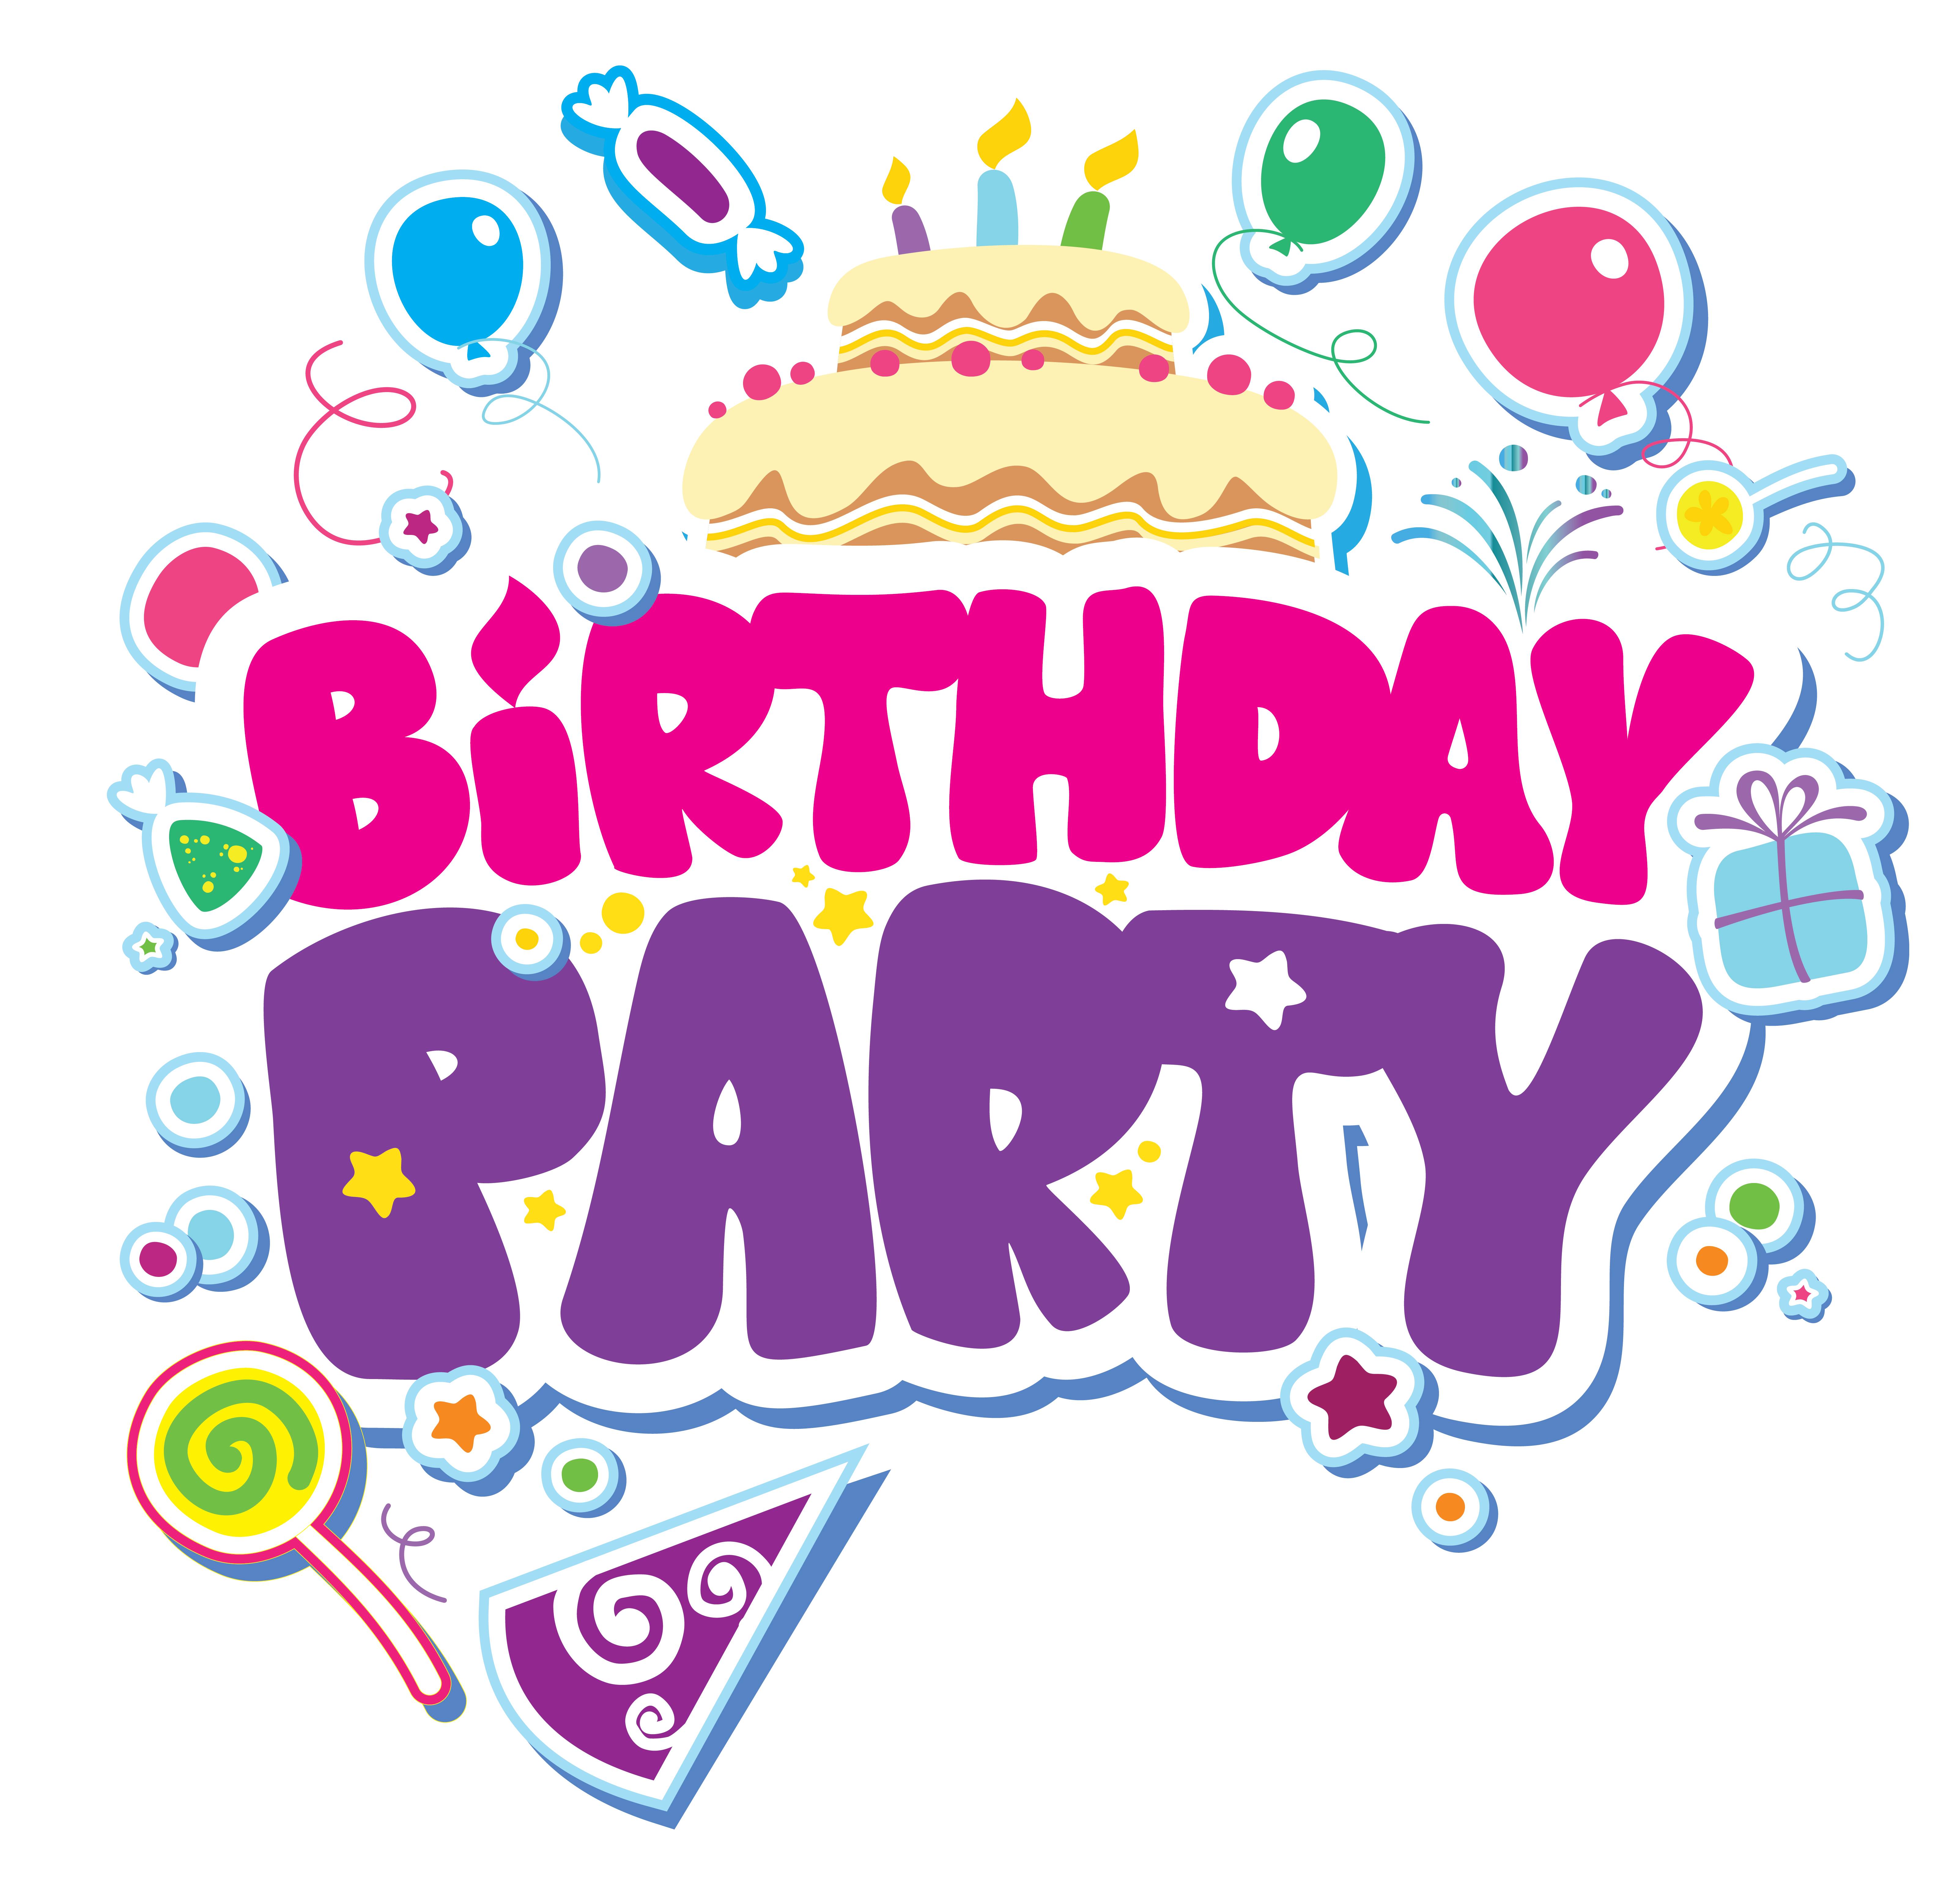 Birthday party png picture. Invitation clipart anniversary